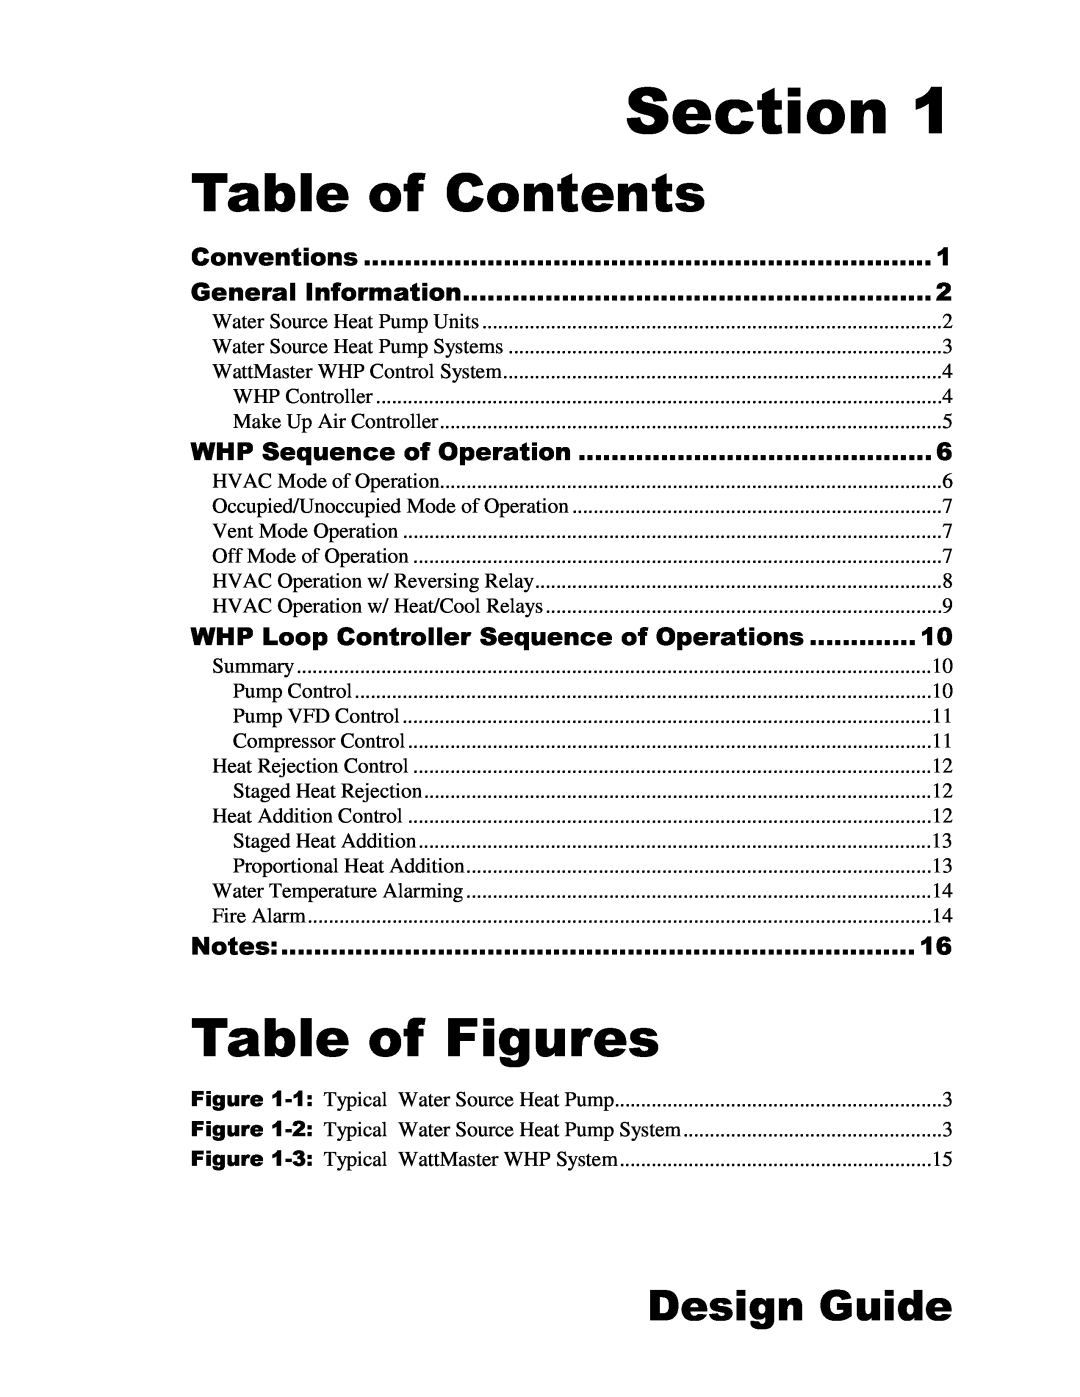 Heat Controller Water Source Heat Pump manual Section, Table of Contents, Table of Figures, Design Guide 